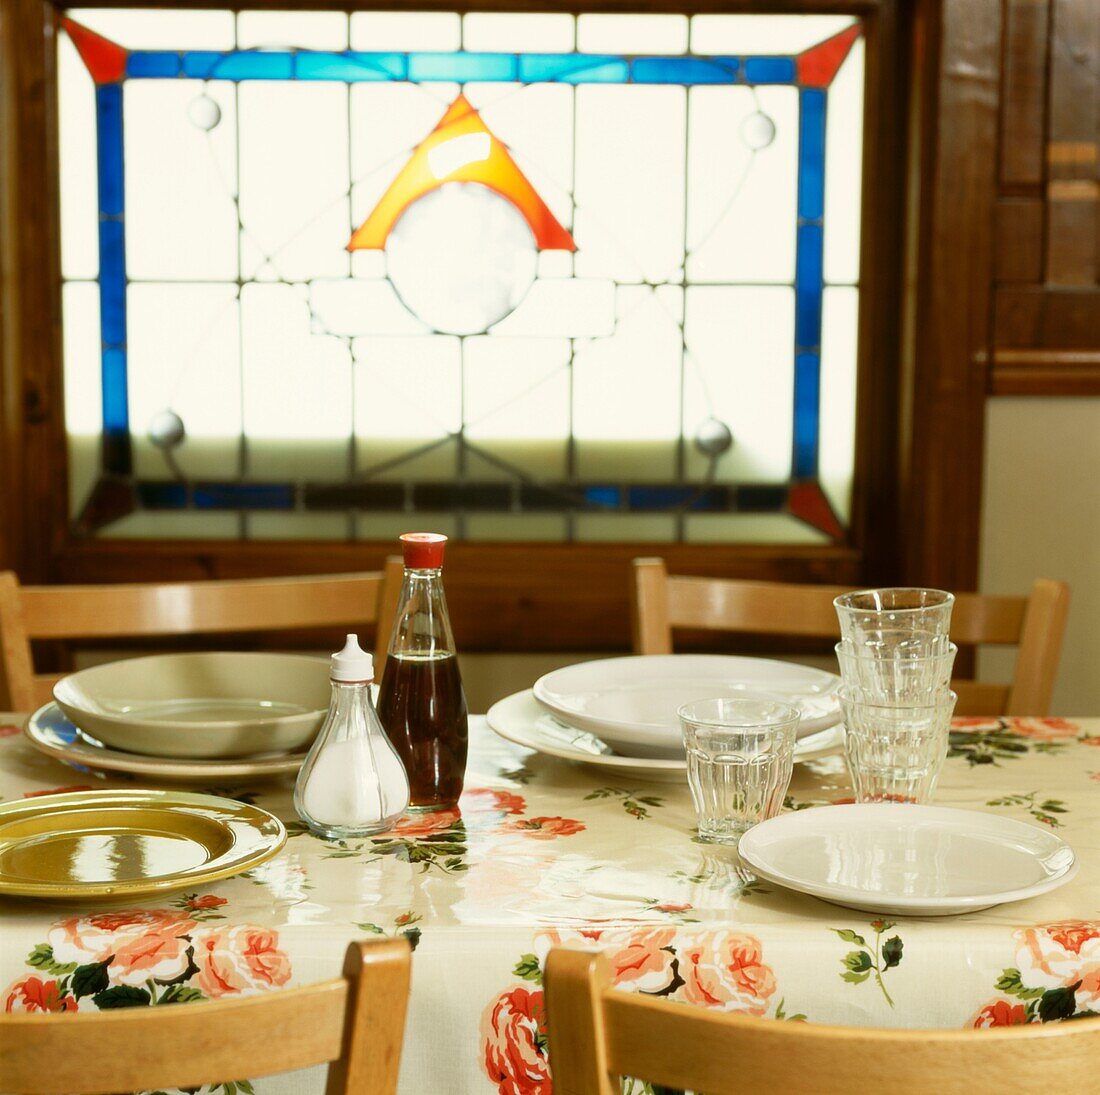 Place settings in cafe with stained glass window